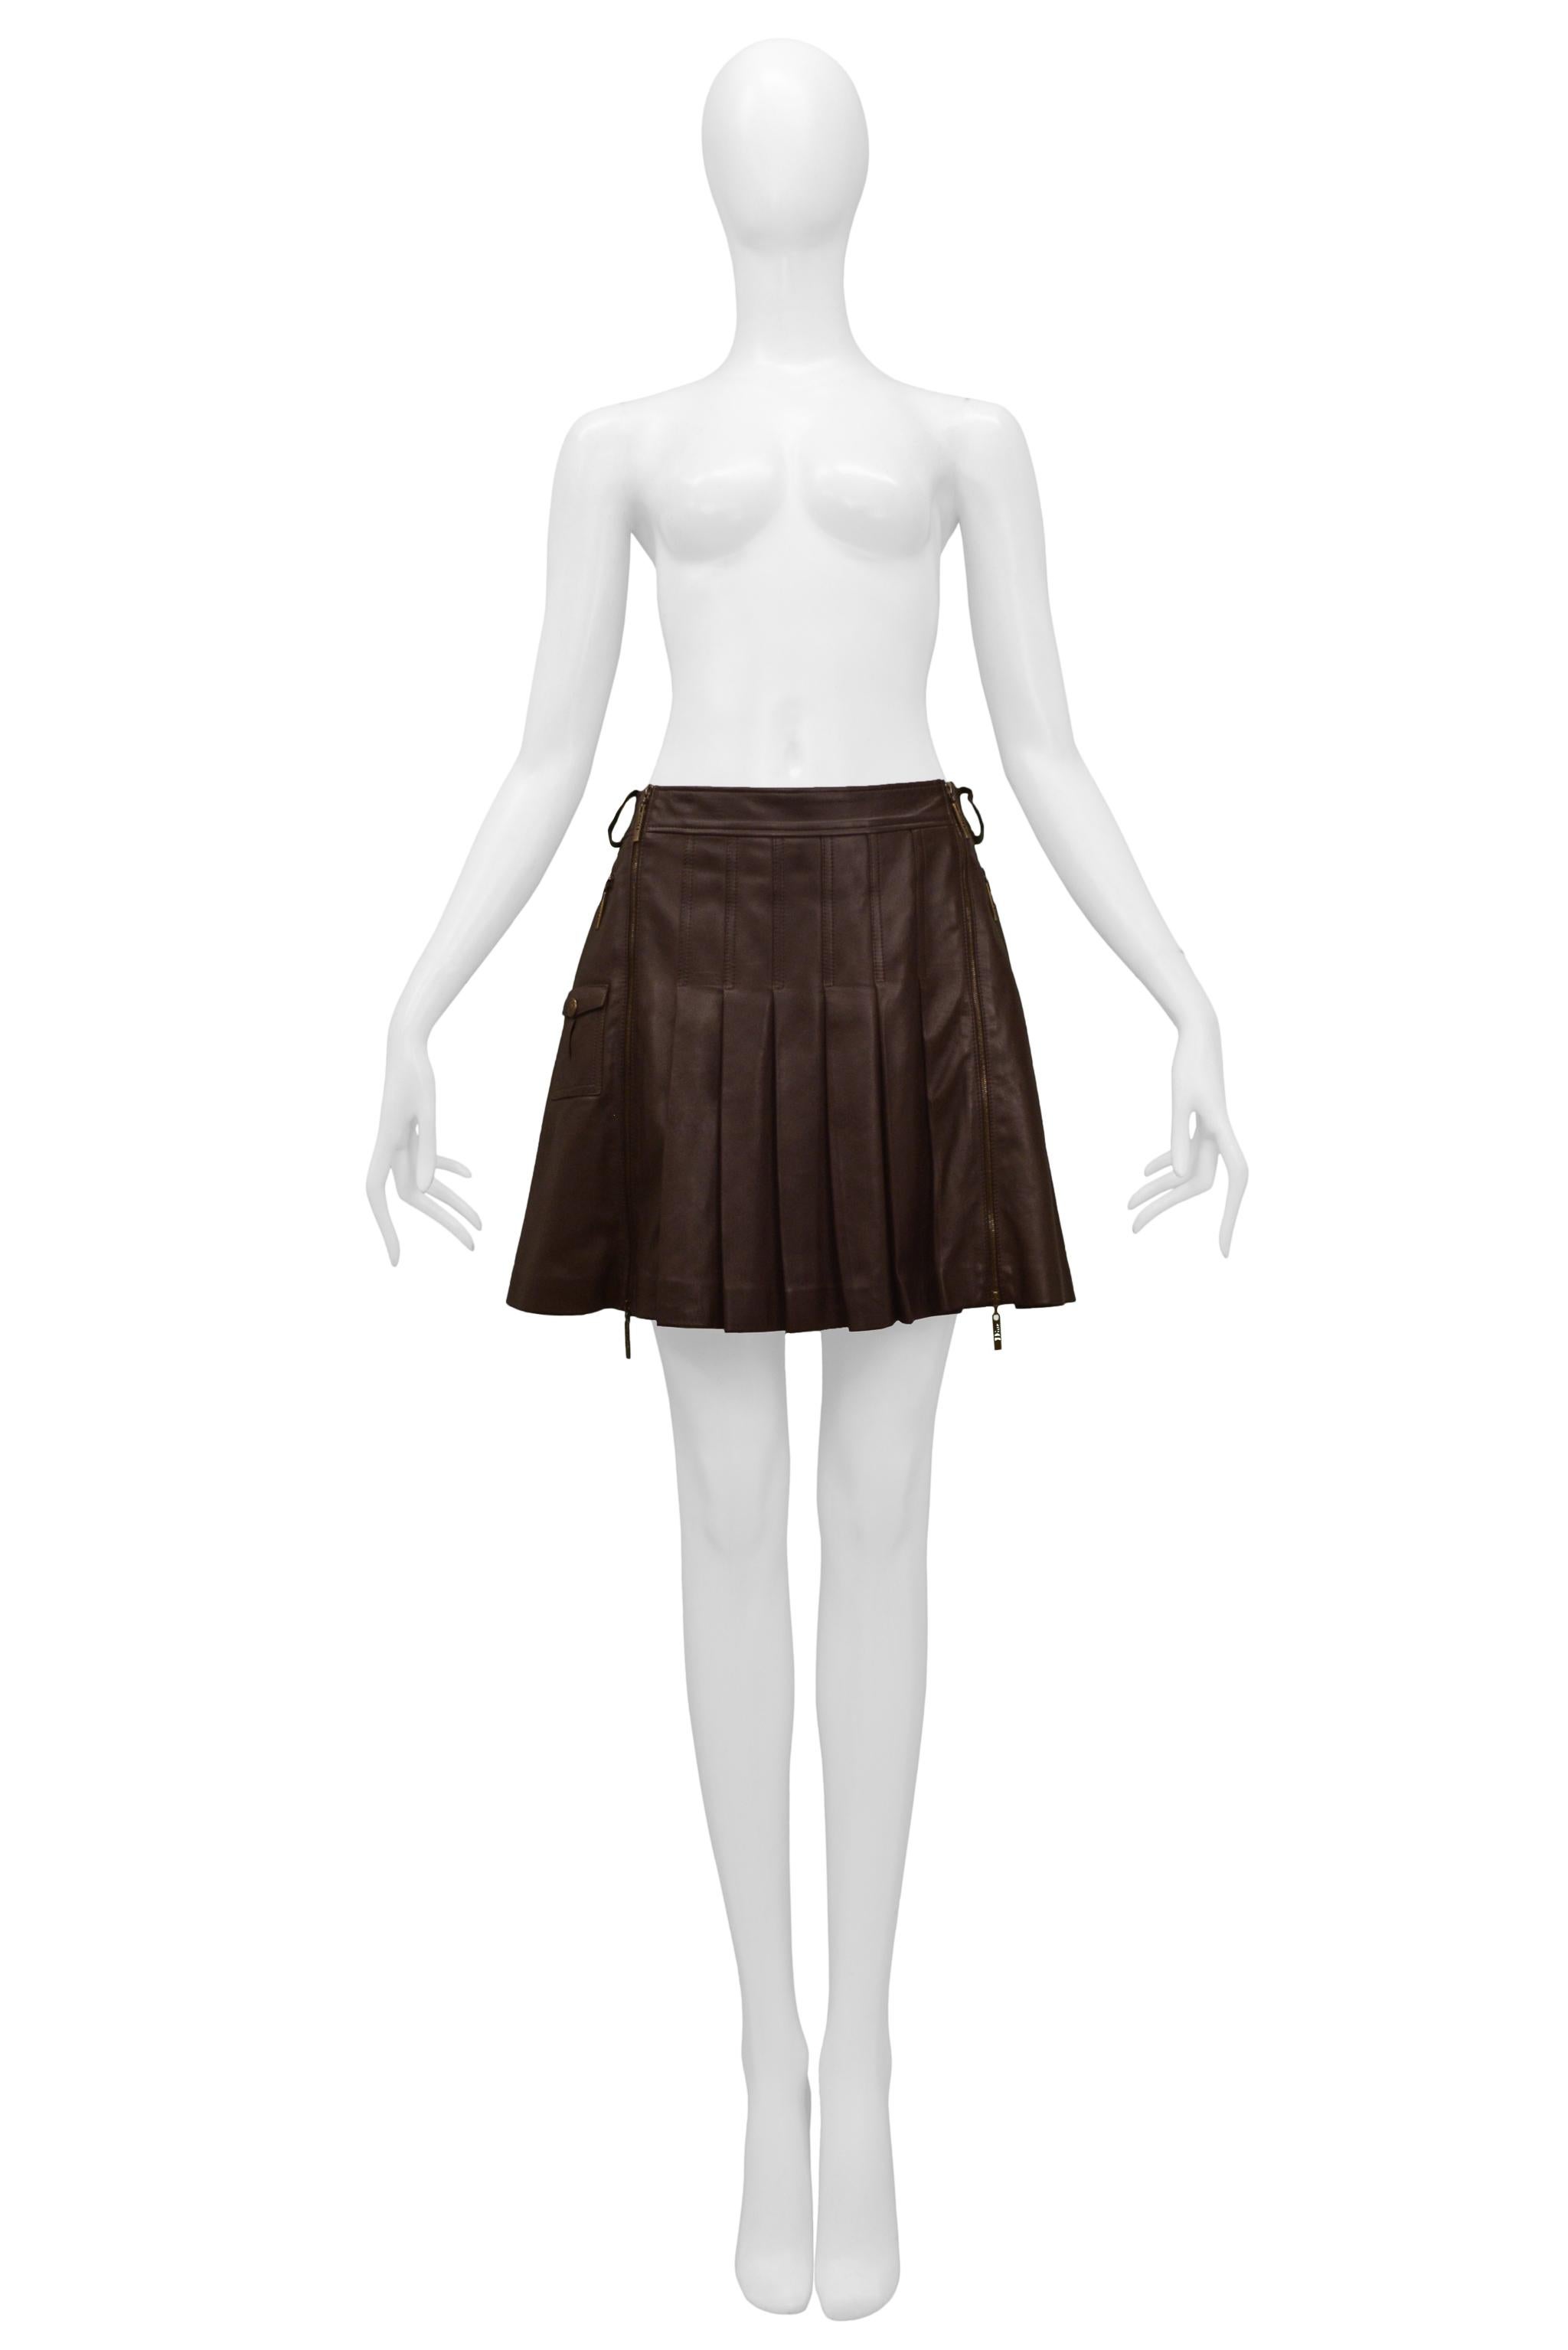 Resurrection is excited to offer a vintage Christian Dior by John Galliano, brown leather pleated mini skirt featuring two-way separating zippers at the front, patch pockets, and belt loops. 

Christian Dior
Size 38
Lambskin
Excellent Vintage